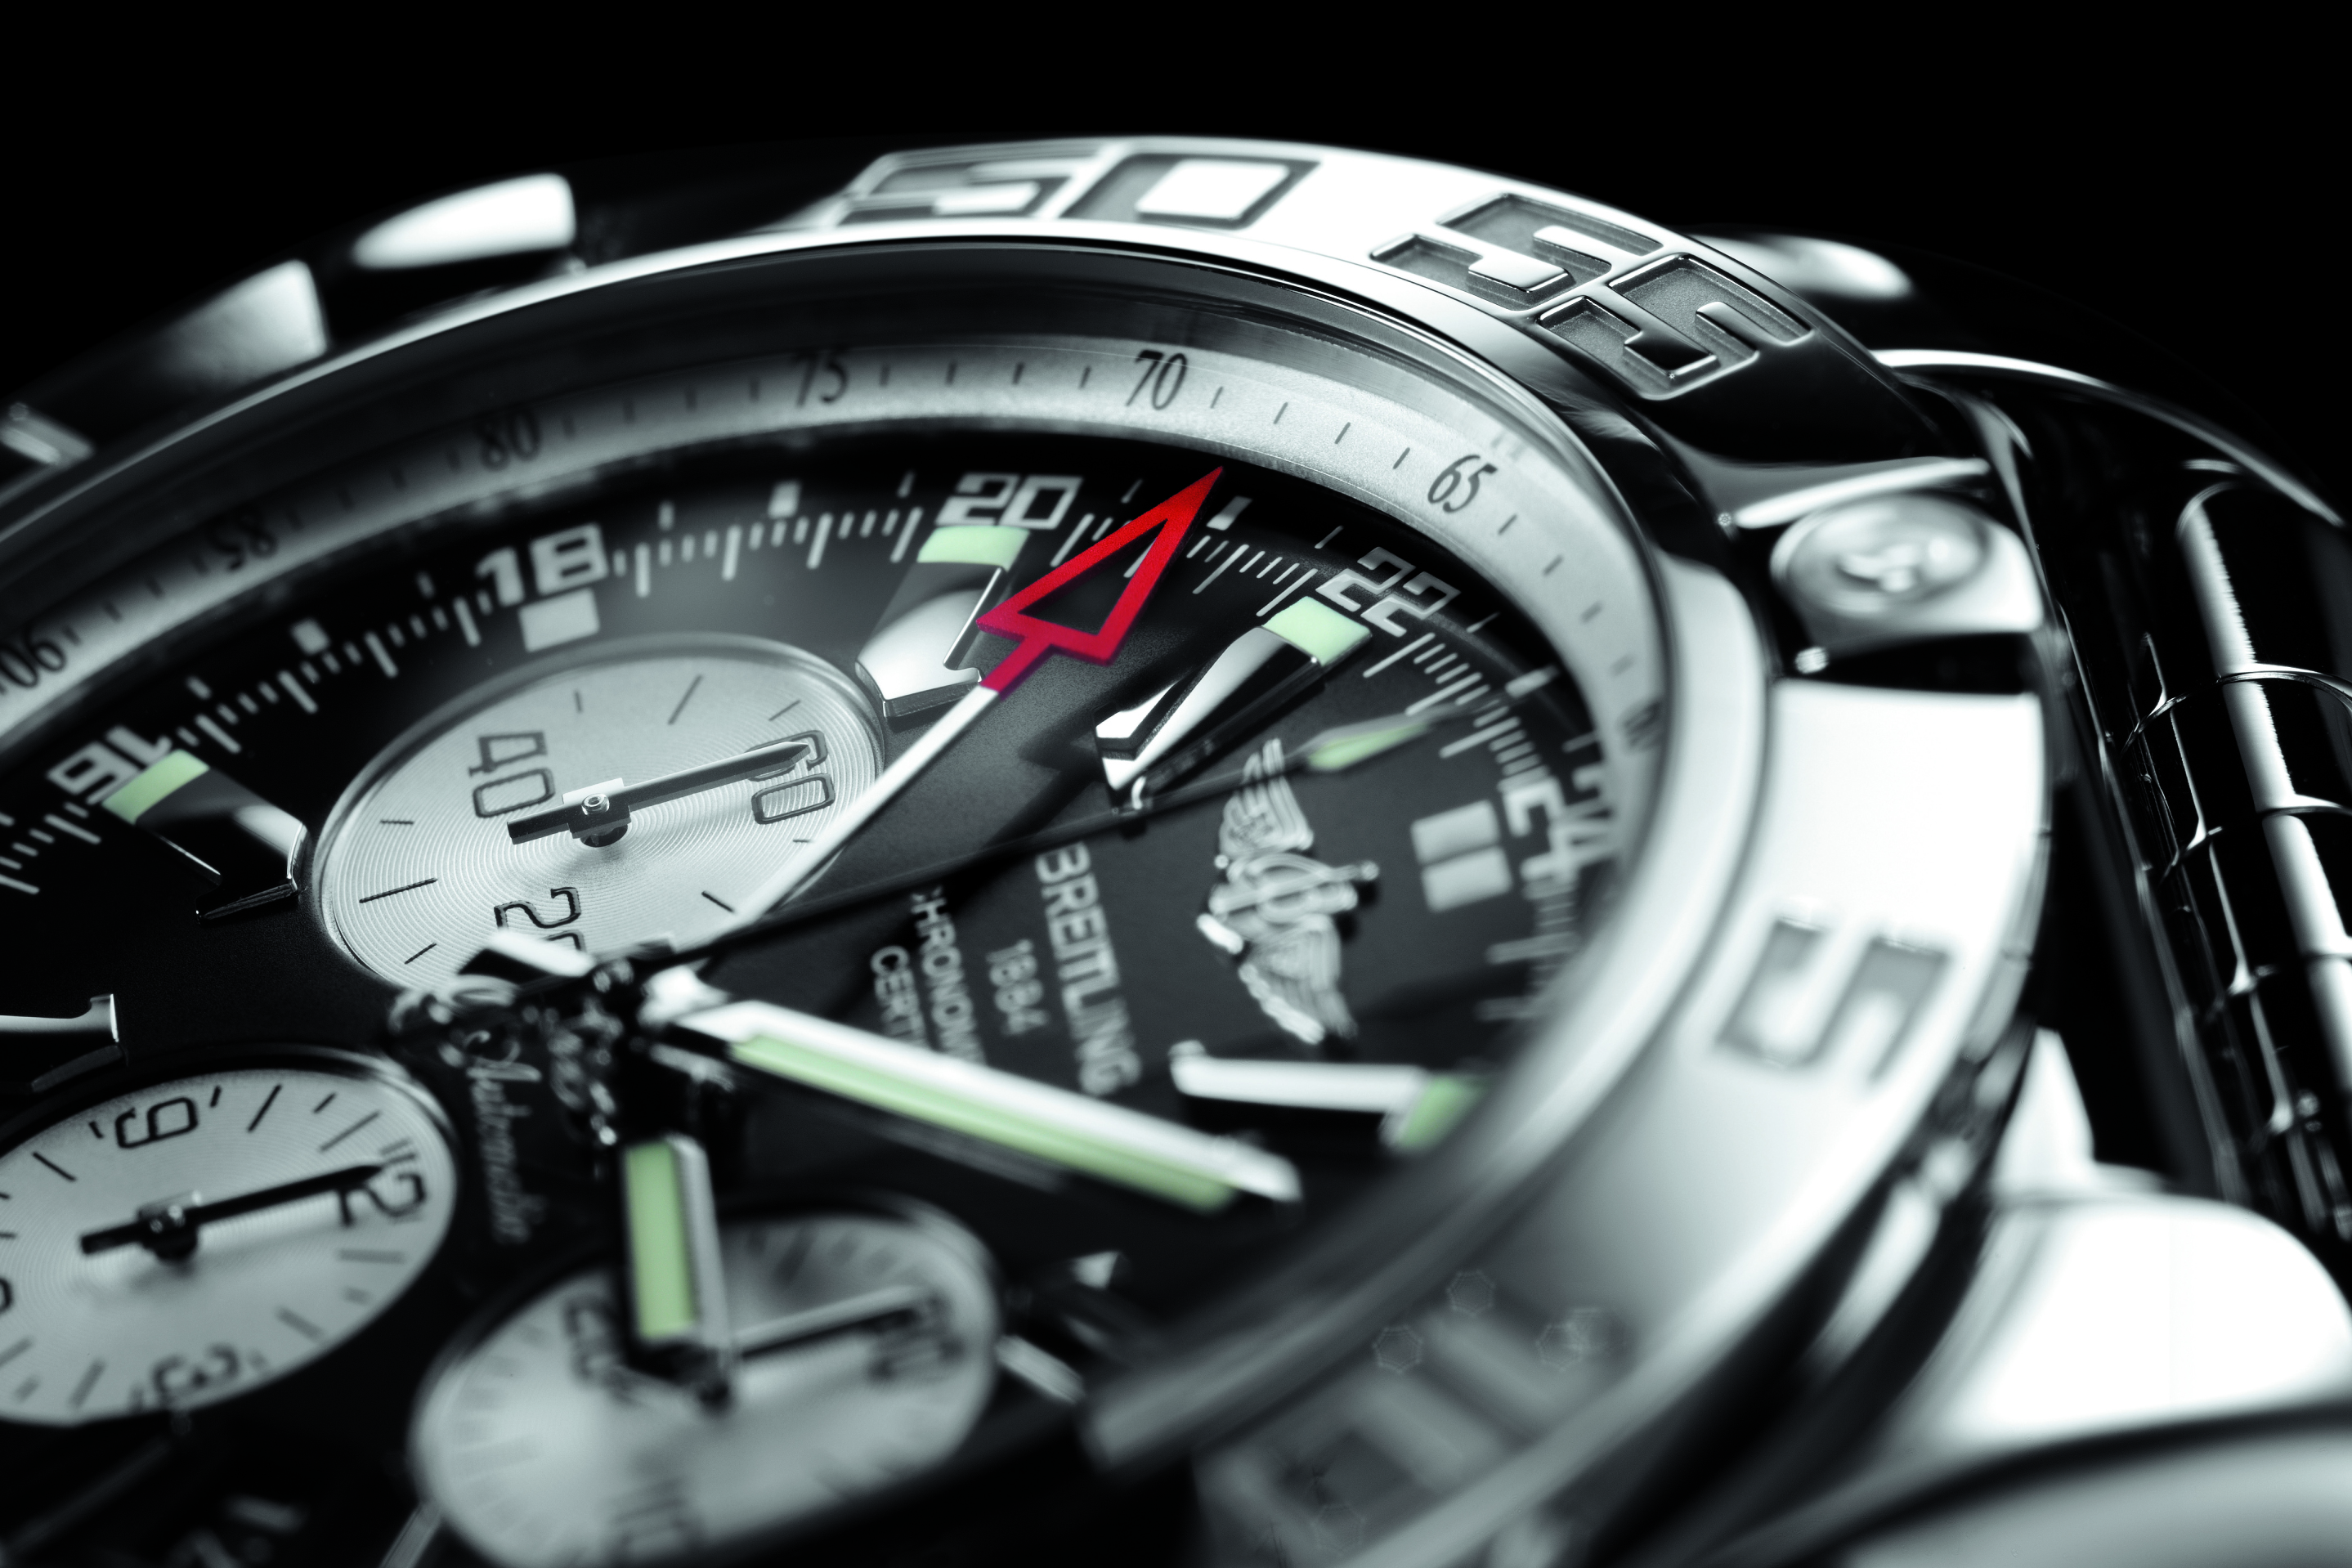 Chronomat GMT easily adjusts to a new time zone